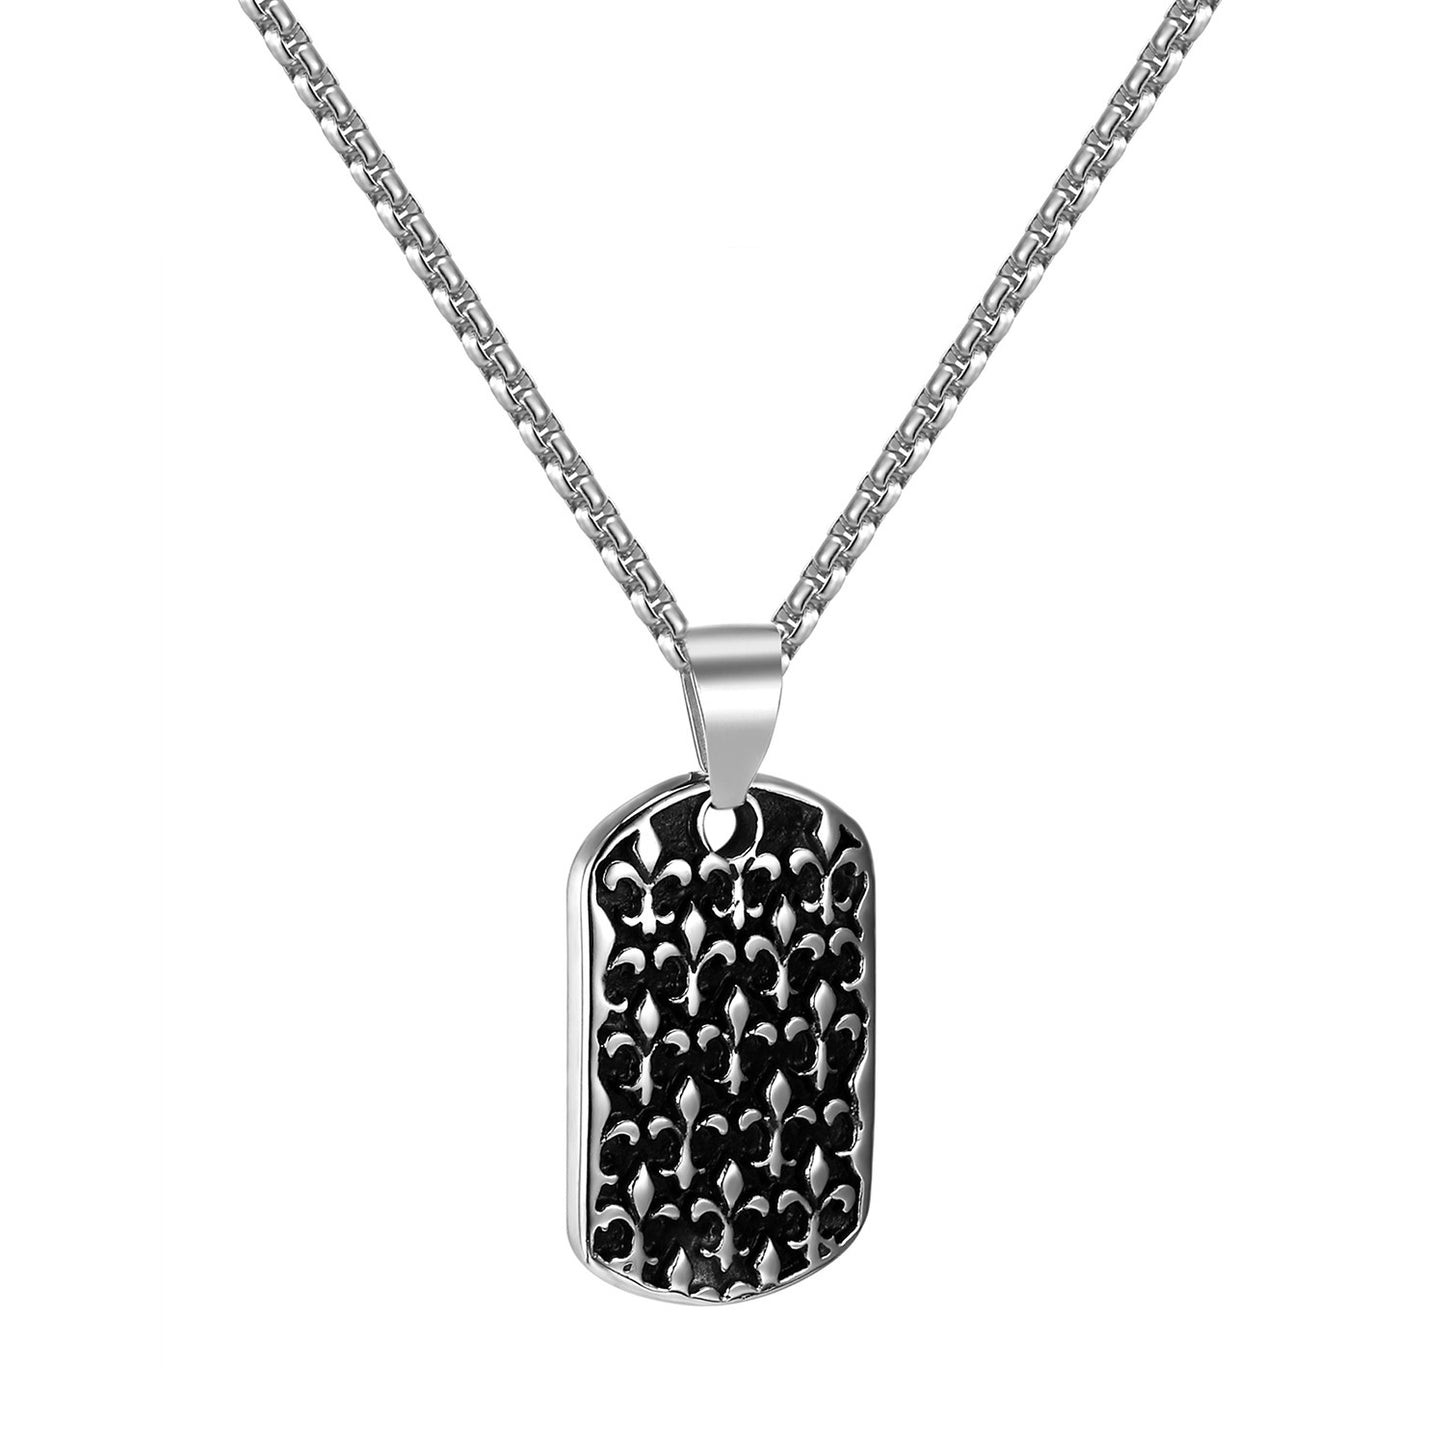 Stainless Steel Dog Tag Pendant Free Box Chain